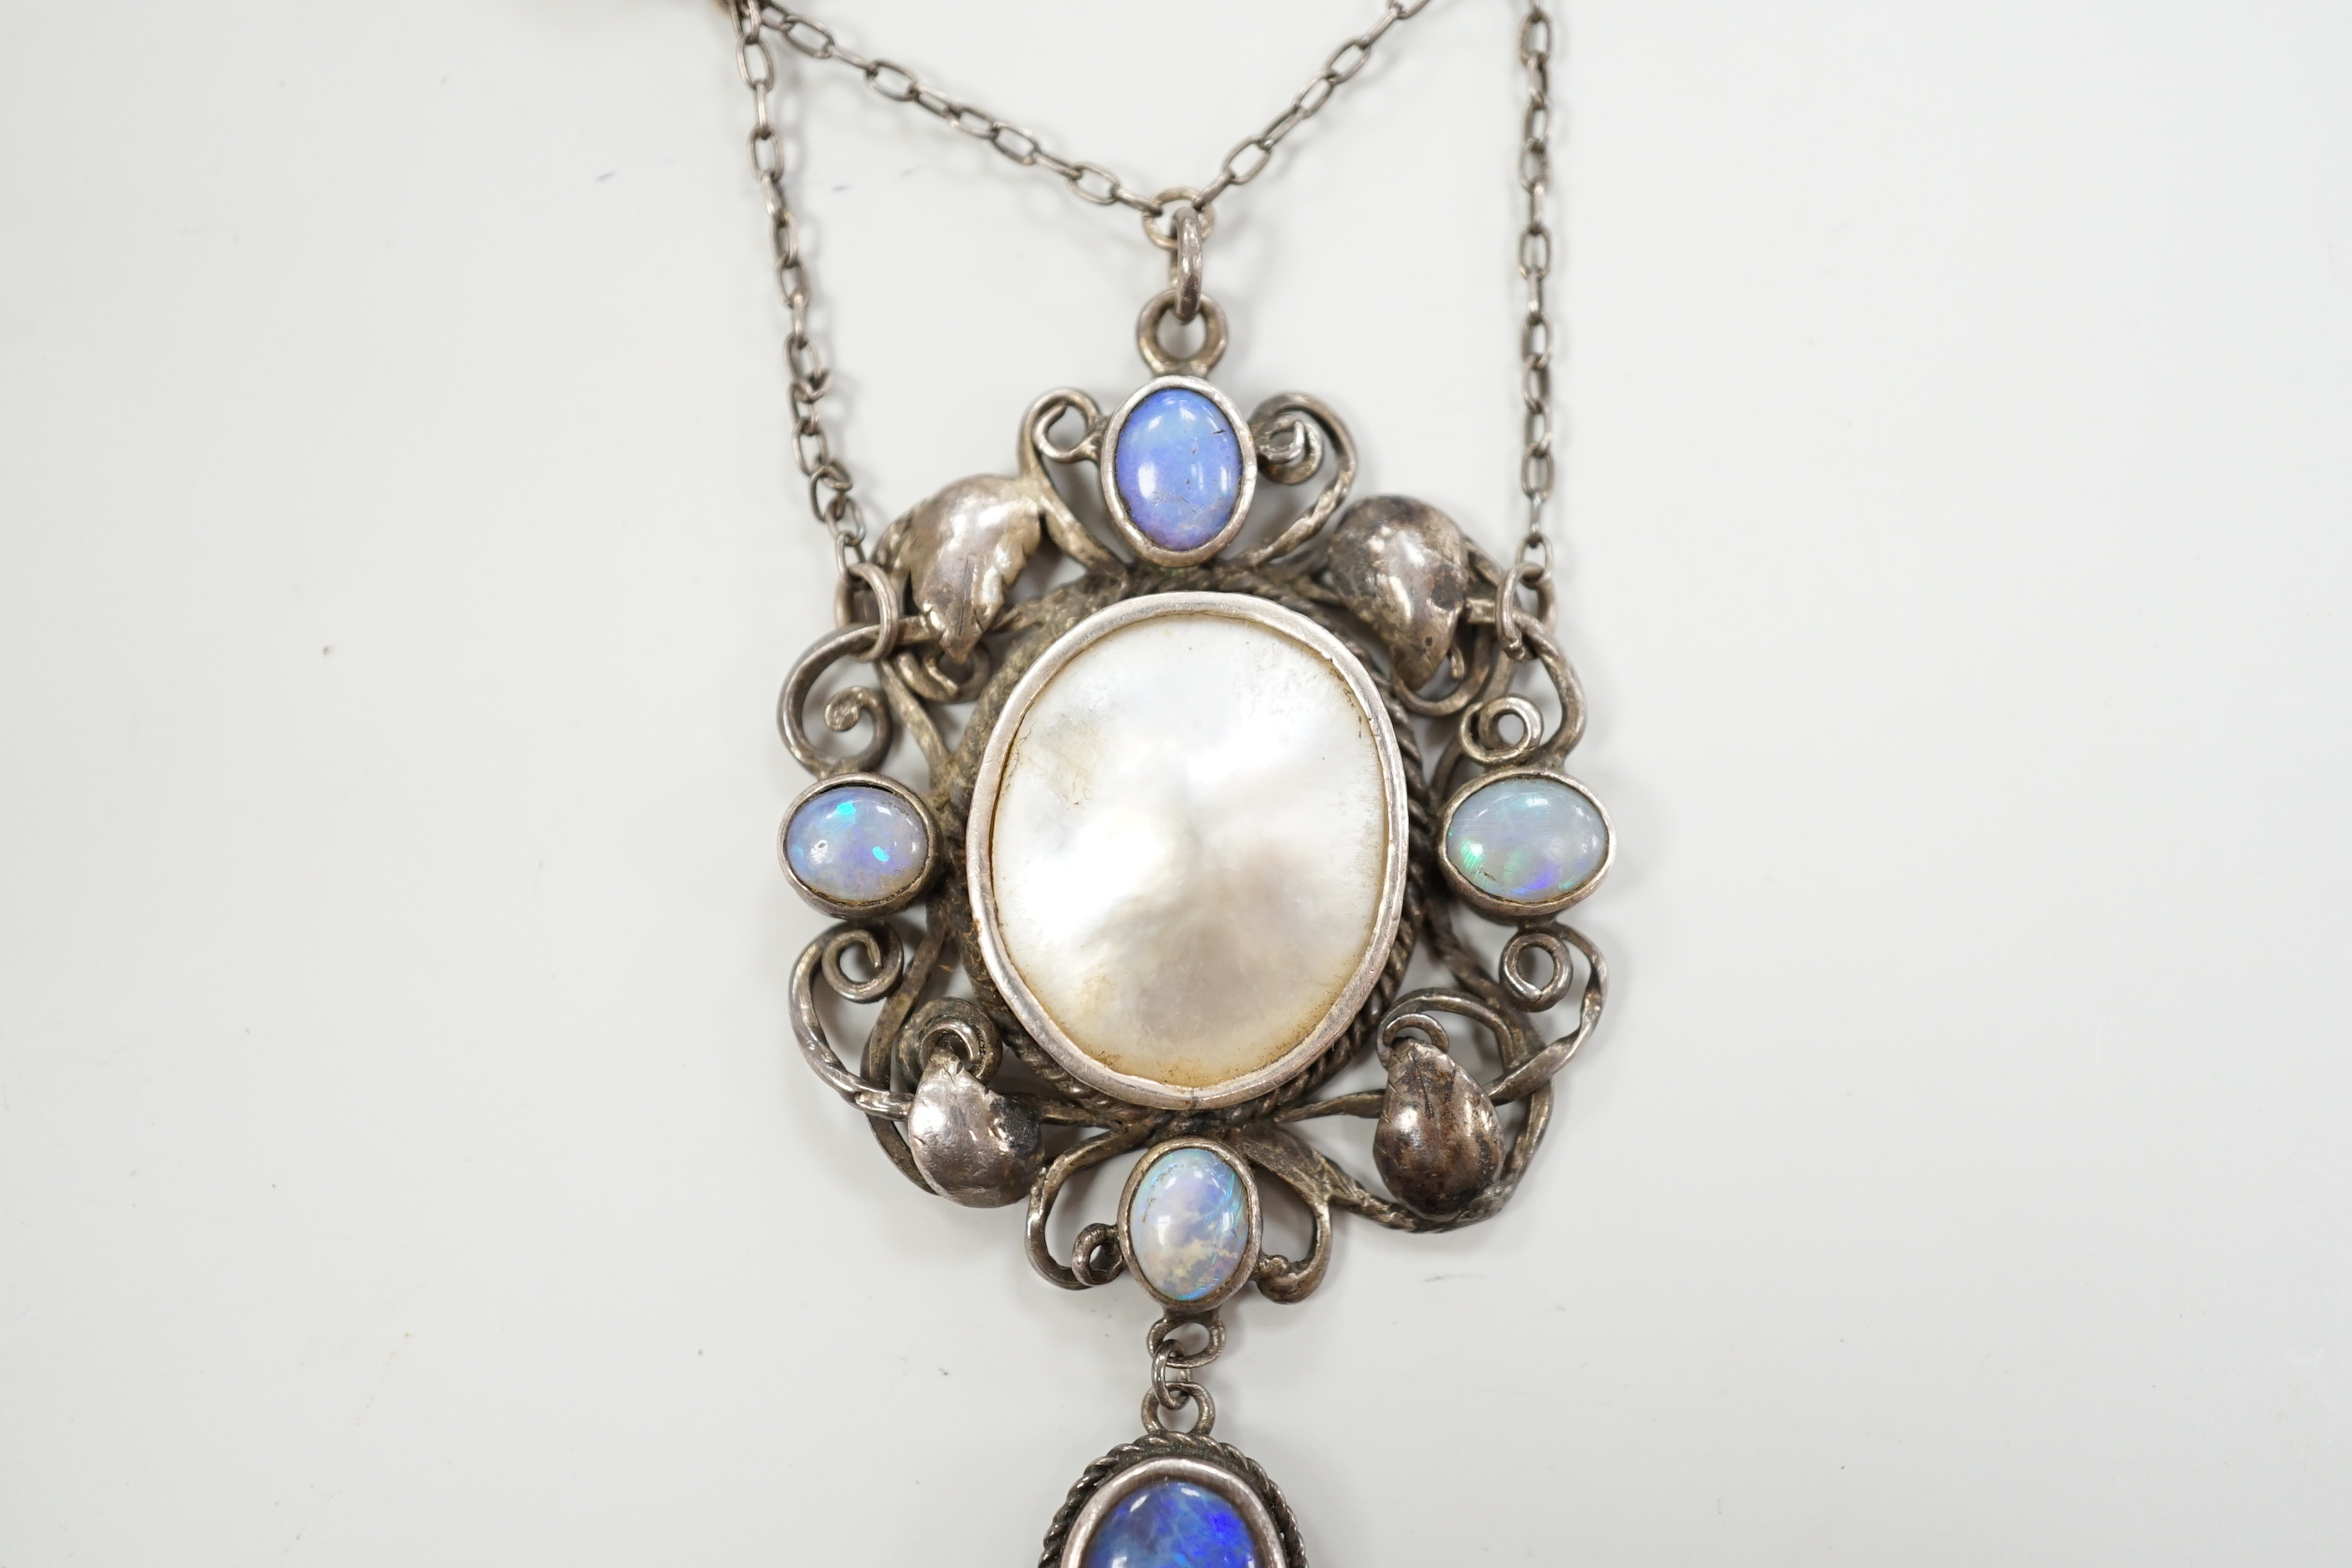 An Arts & Crafts white metal, mother of pearl and gem set drop pendant necklace, in the manner of Sybil Dunlop, overall 56cm.